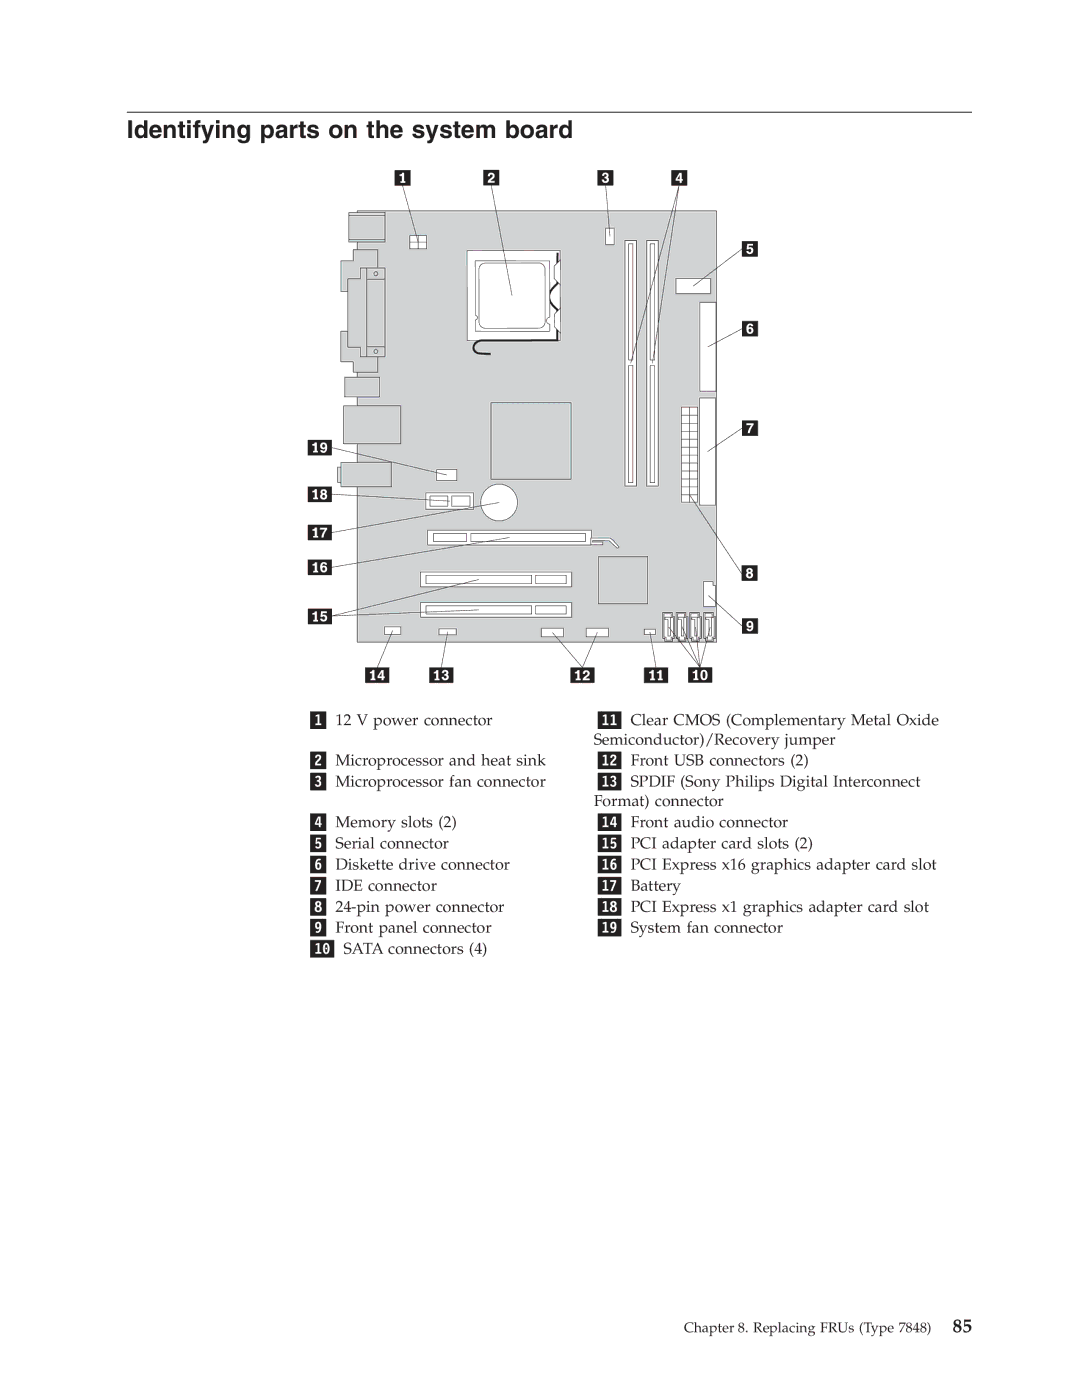 Lenovo E200 manual Identifying parts on the system board 